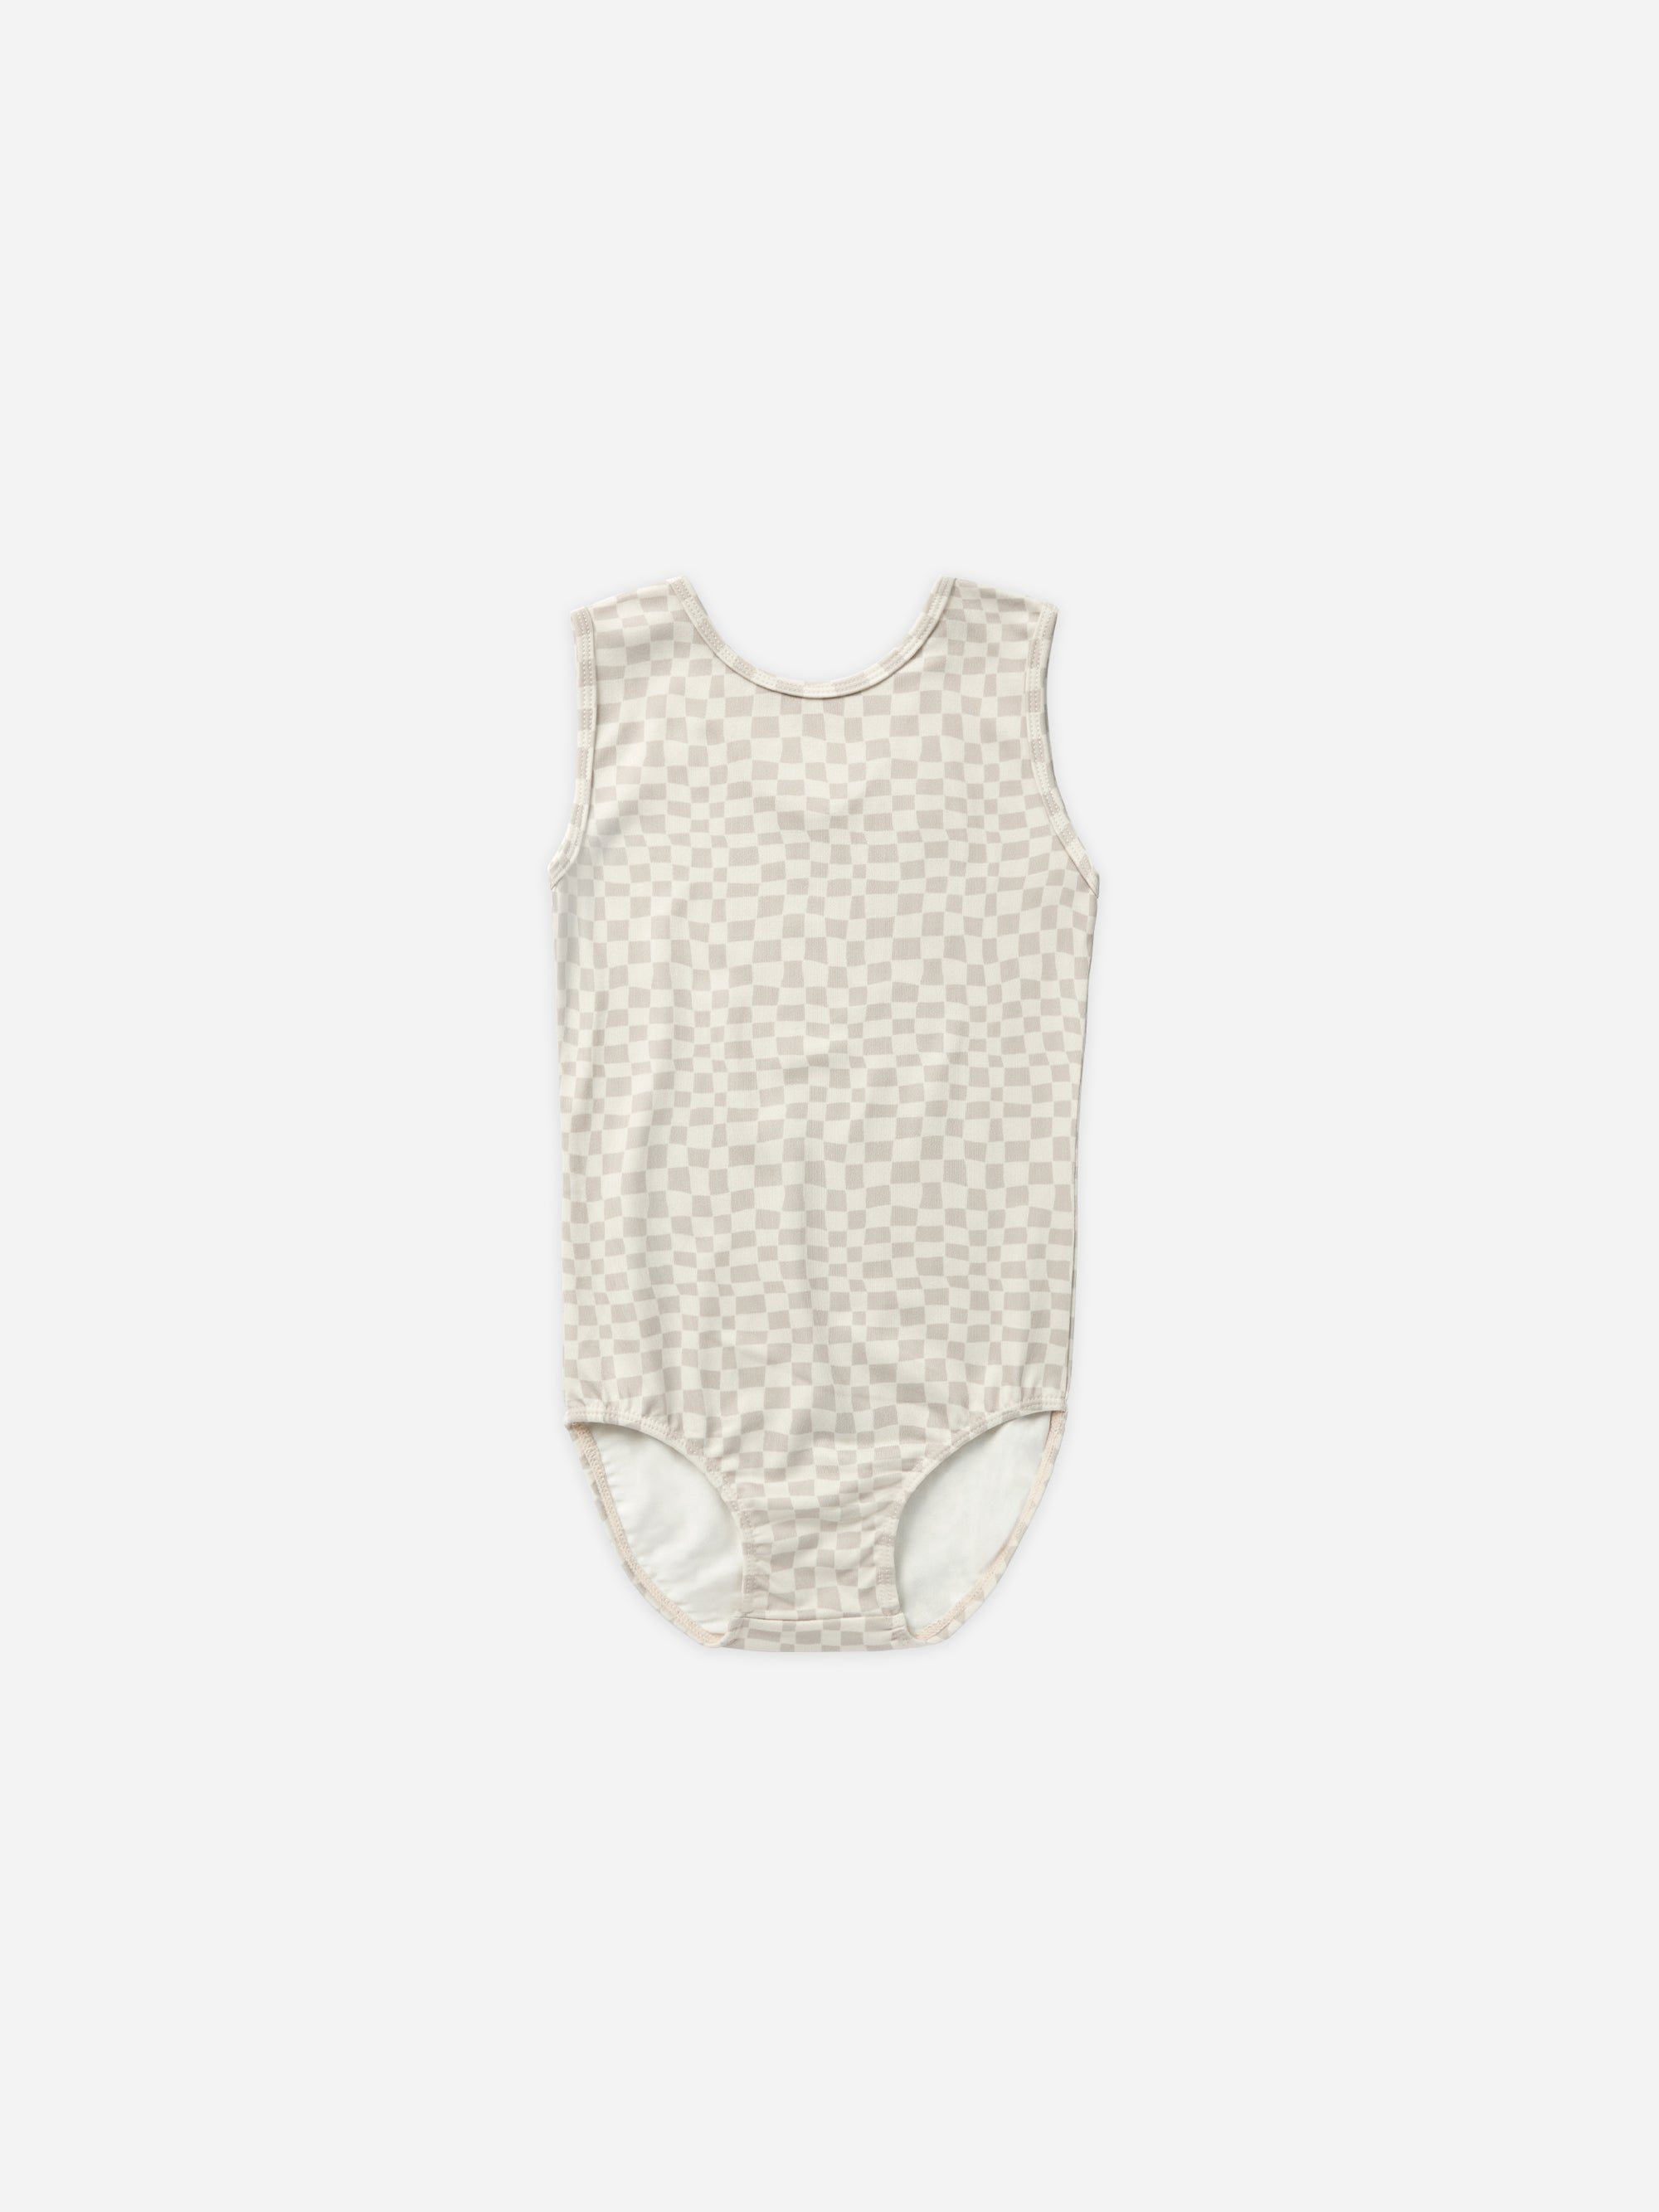 Basic Leotard || Dove Check - Rylee + Cru | Kids Clothes | Trendy Baby Clothes | Modern Infant Outfits |